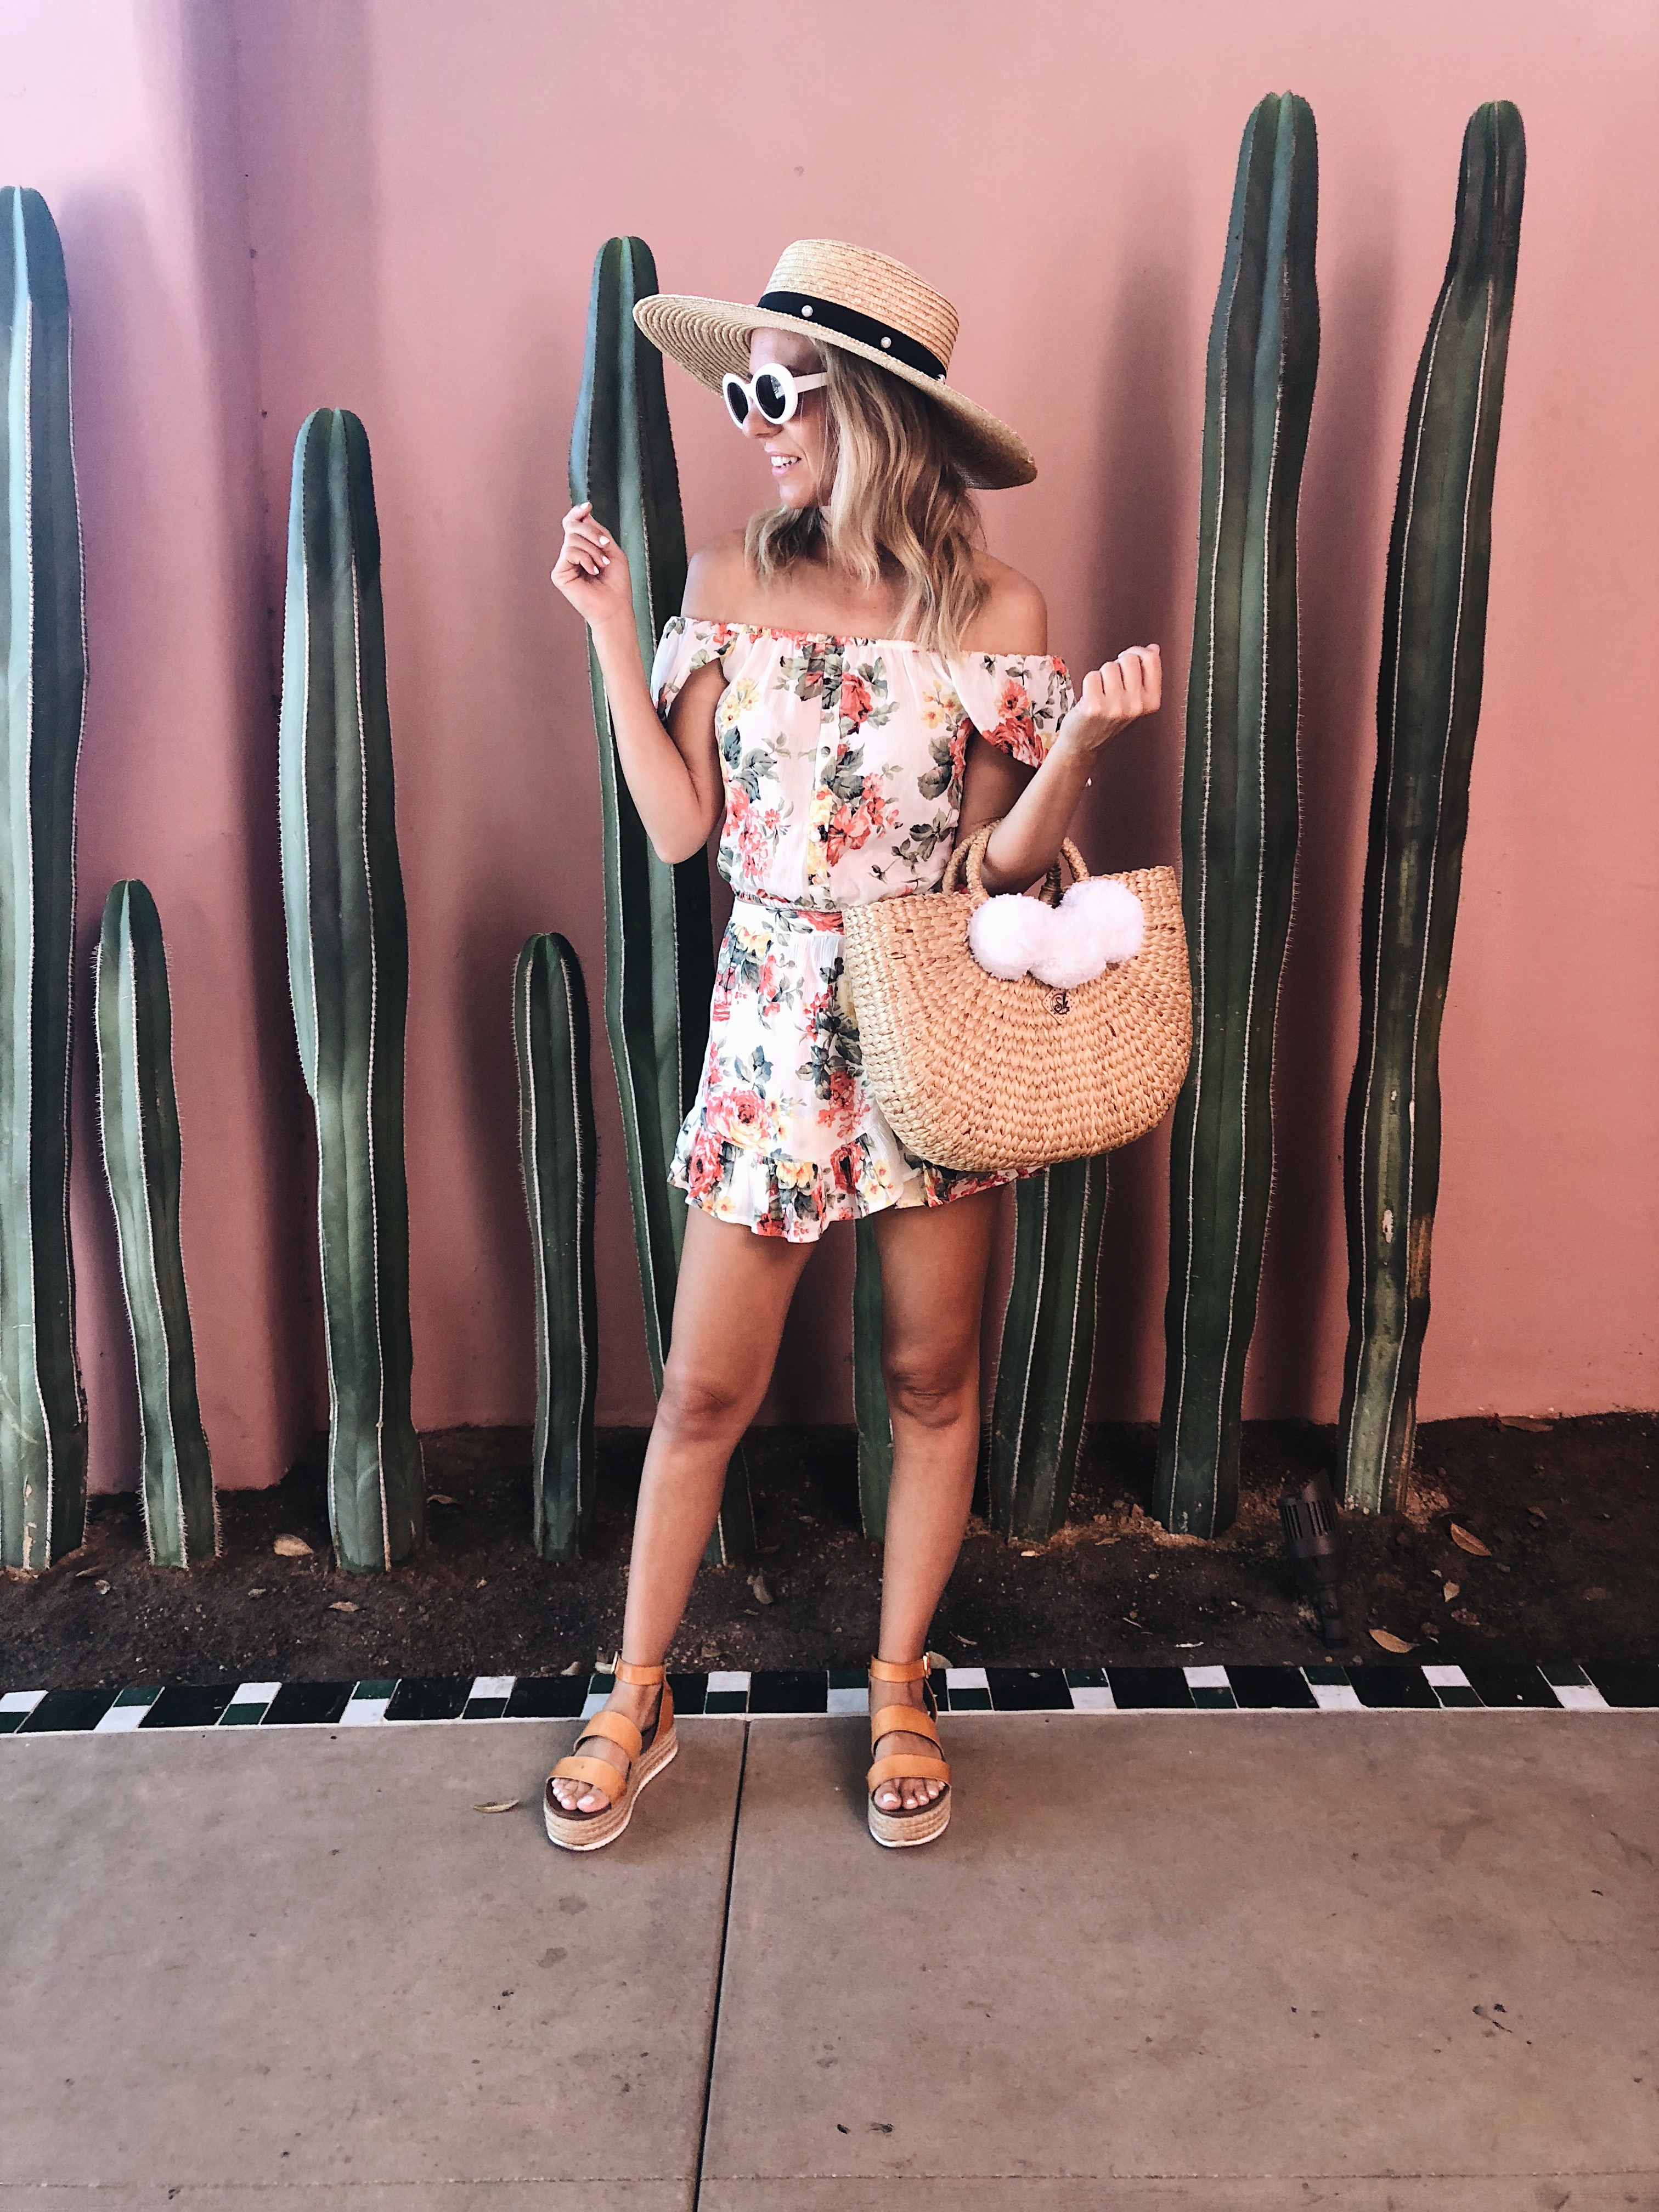 ANNIVERSARY WEEKEND GETAWAY AT THE SANDS HOTEL- Jaclyn De Leon Style + PALM SPRINGS HOTEL + BOHEMIAN + PINK WALL WITH CACTUS + RETRO SUNGLASSES + POM POM STRAW BEACH TOTE + WIDE BRIM STRAW HAT + PLATFORM SANDALS + ABERCROMBIE FLORAL MATCHING SET + SUMMER STYLE + VACATION + TRAVEL